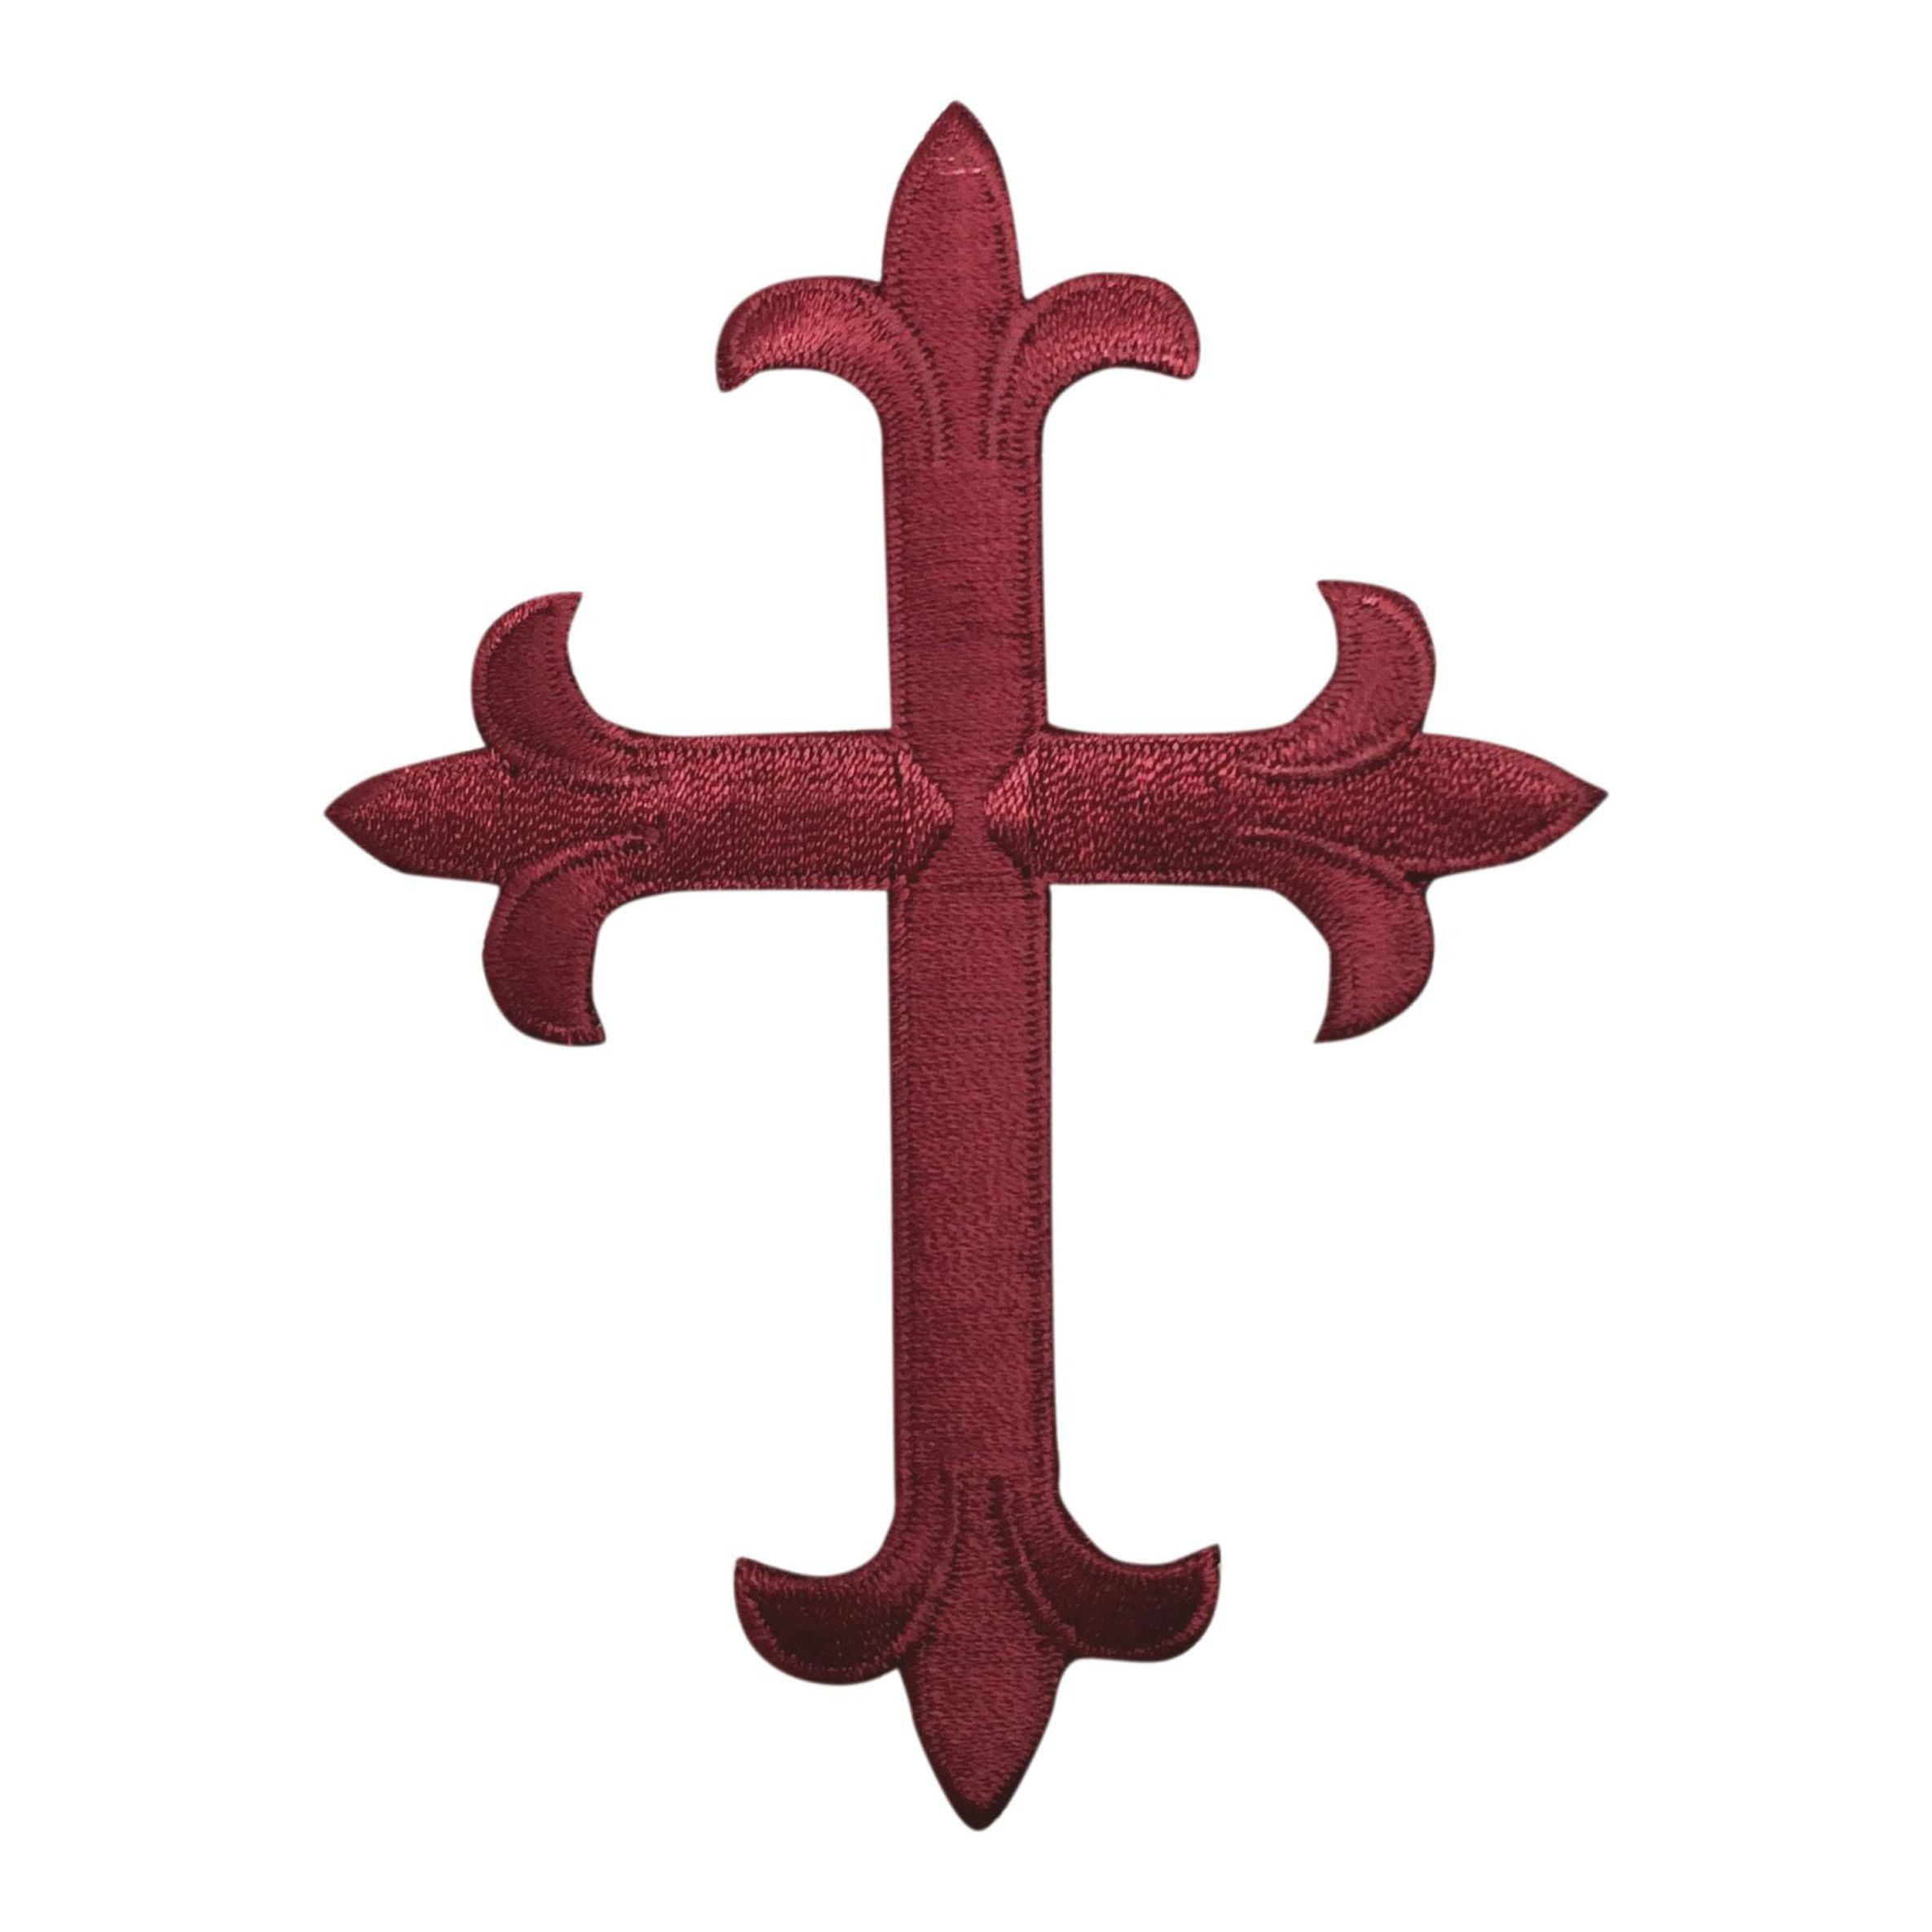 Pink Christian Cross Patch, Religious Cross Patches